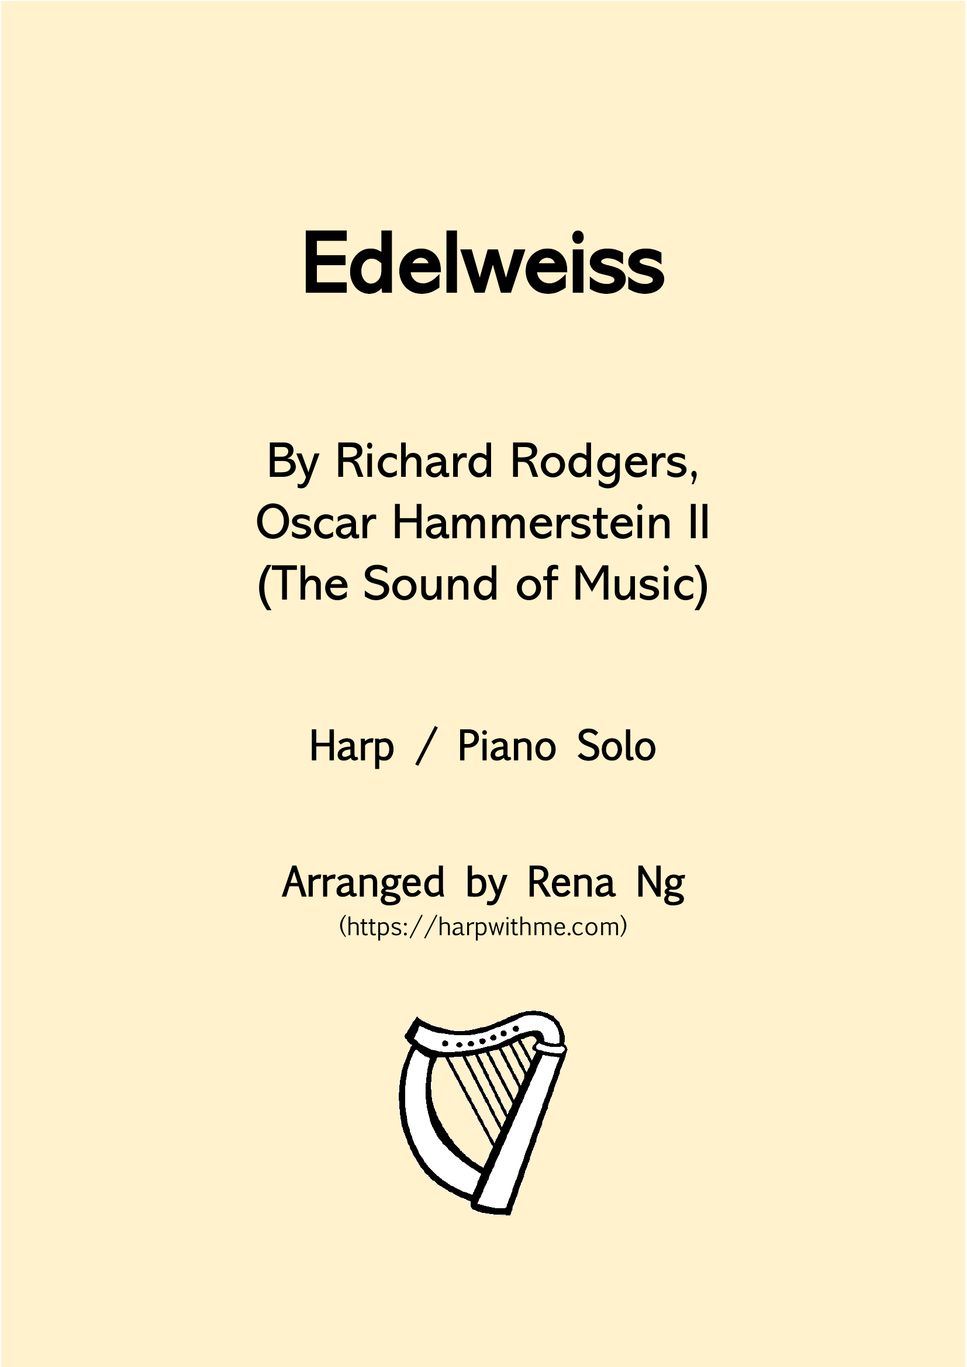 The Sound of Music - Edelweiss (Harp / Piano Solo) - Intermediate by Harp With Me